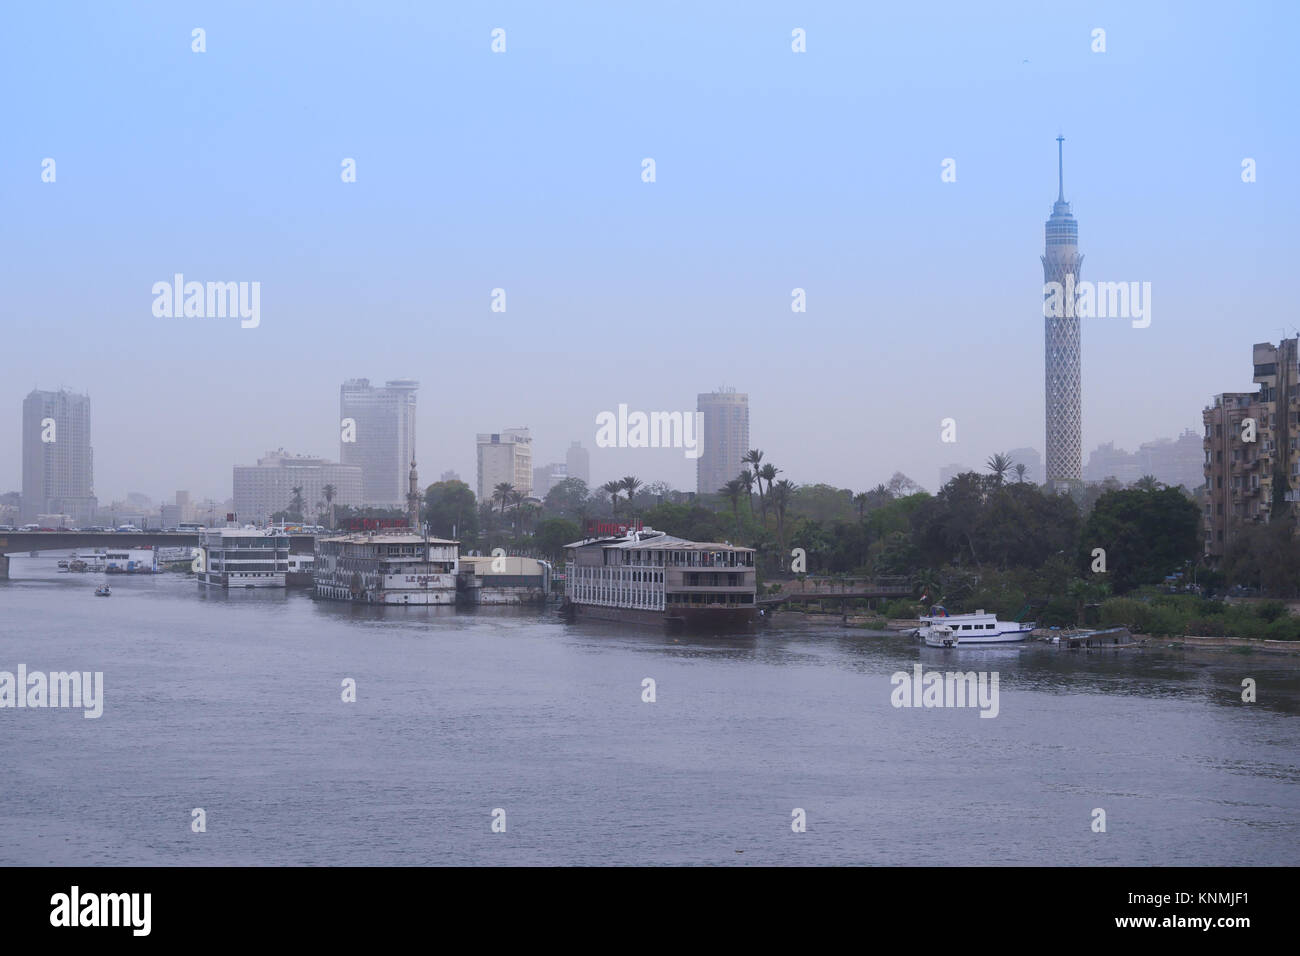 The nile, the Cairo tower with wide view in sunset, and the Kasr El-Nil bridge in Cairo, Egypt Stock Photo